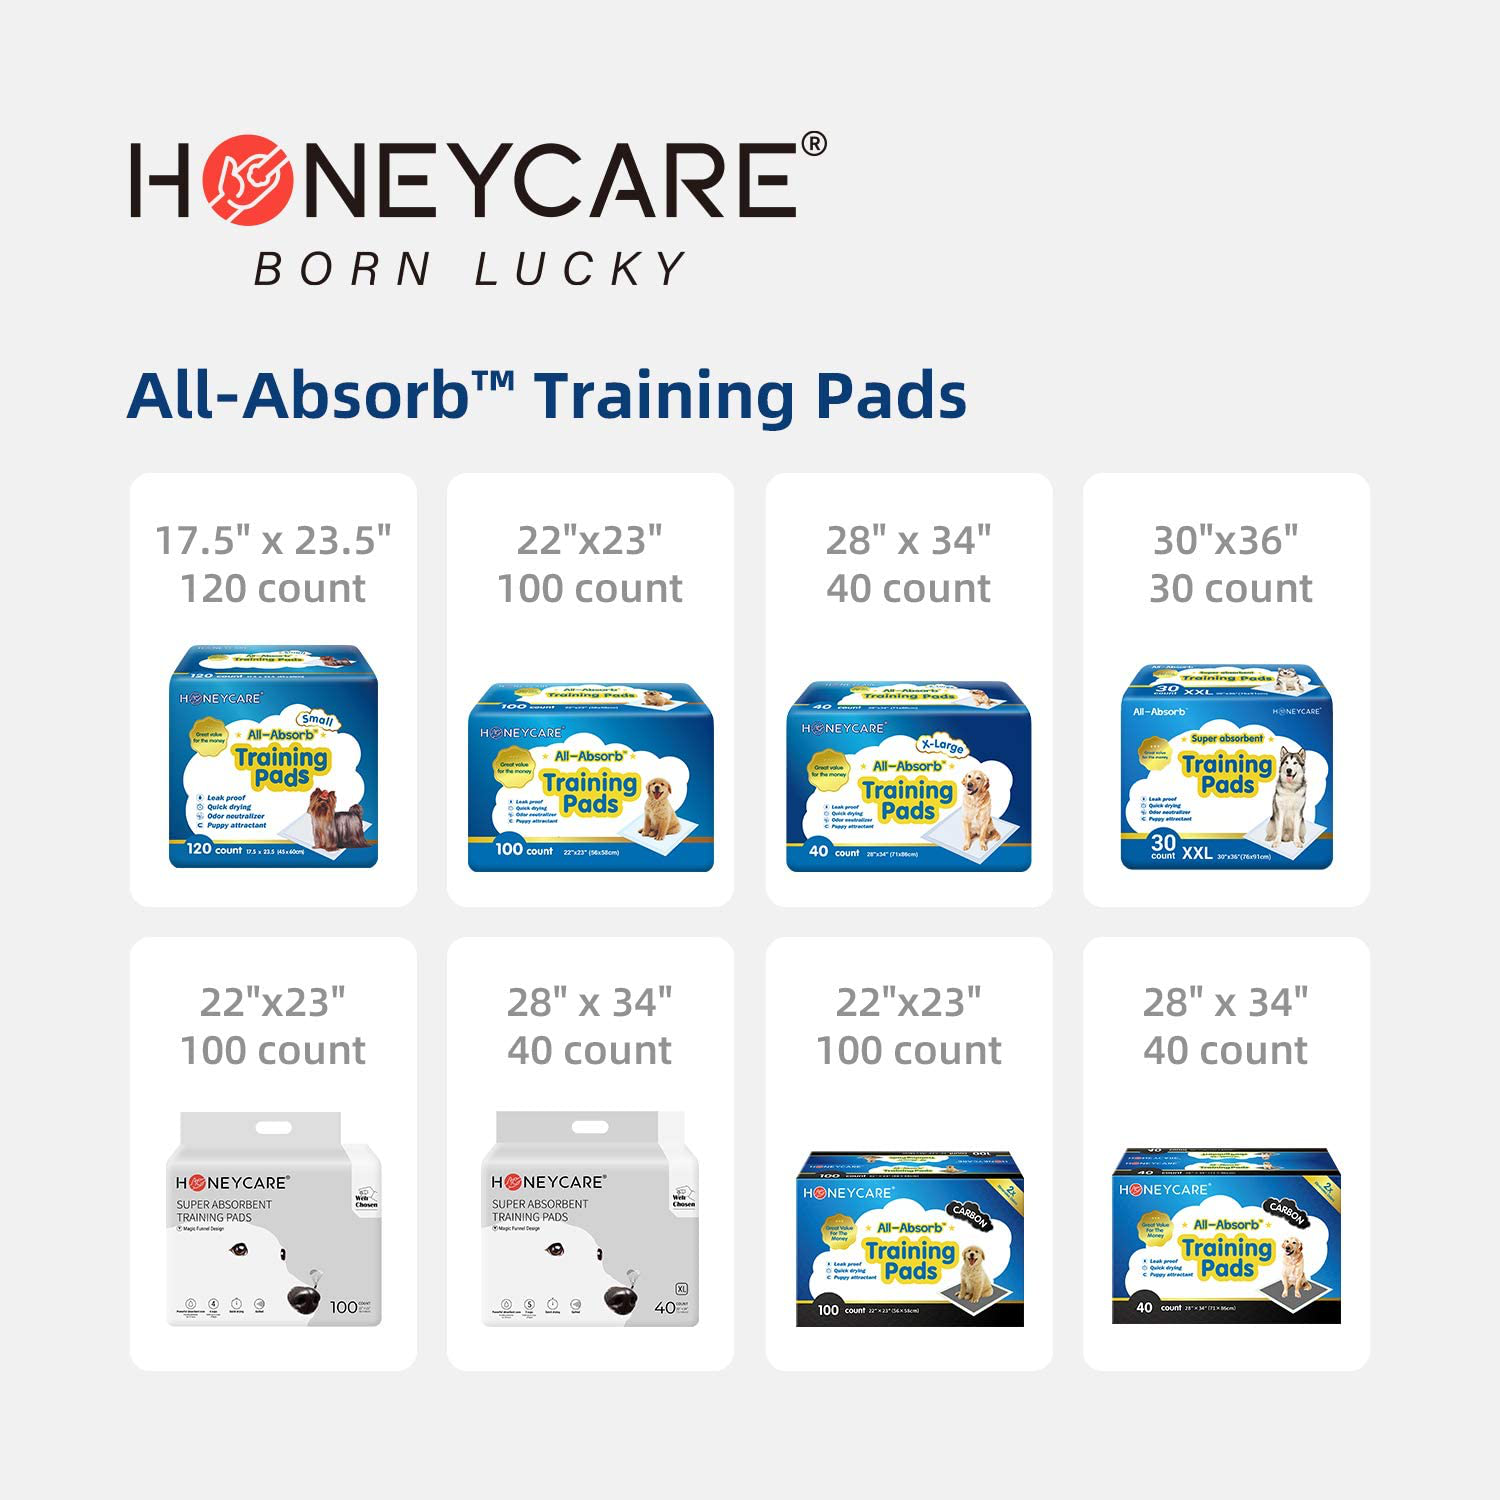 HONEY CARE All-Absorb Large Silicone Pad Holder, 23.5"X23.5", Blue (A10) Animals & Pet Supplies > Pet Supplies > Dog Supplies > Dog Diaper Pads & Liners All-Absorb   